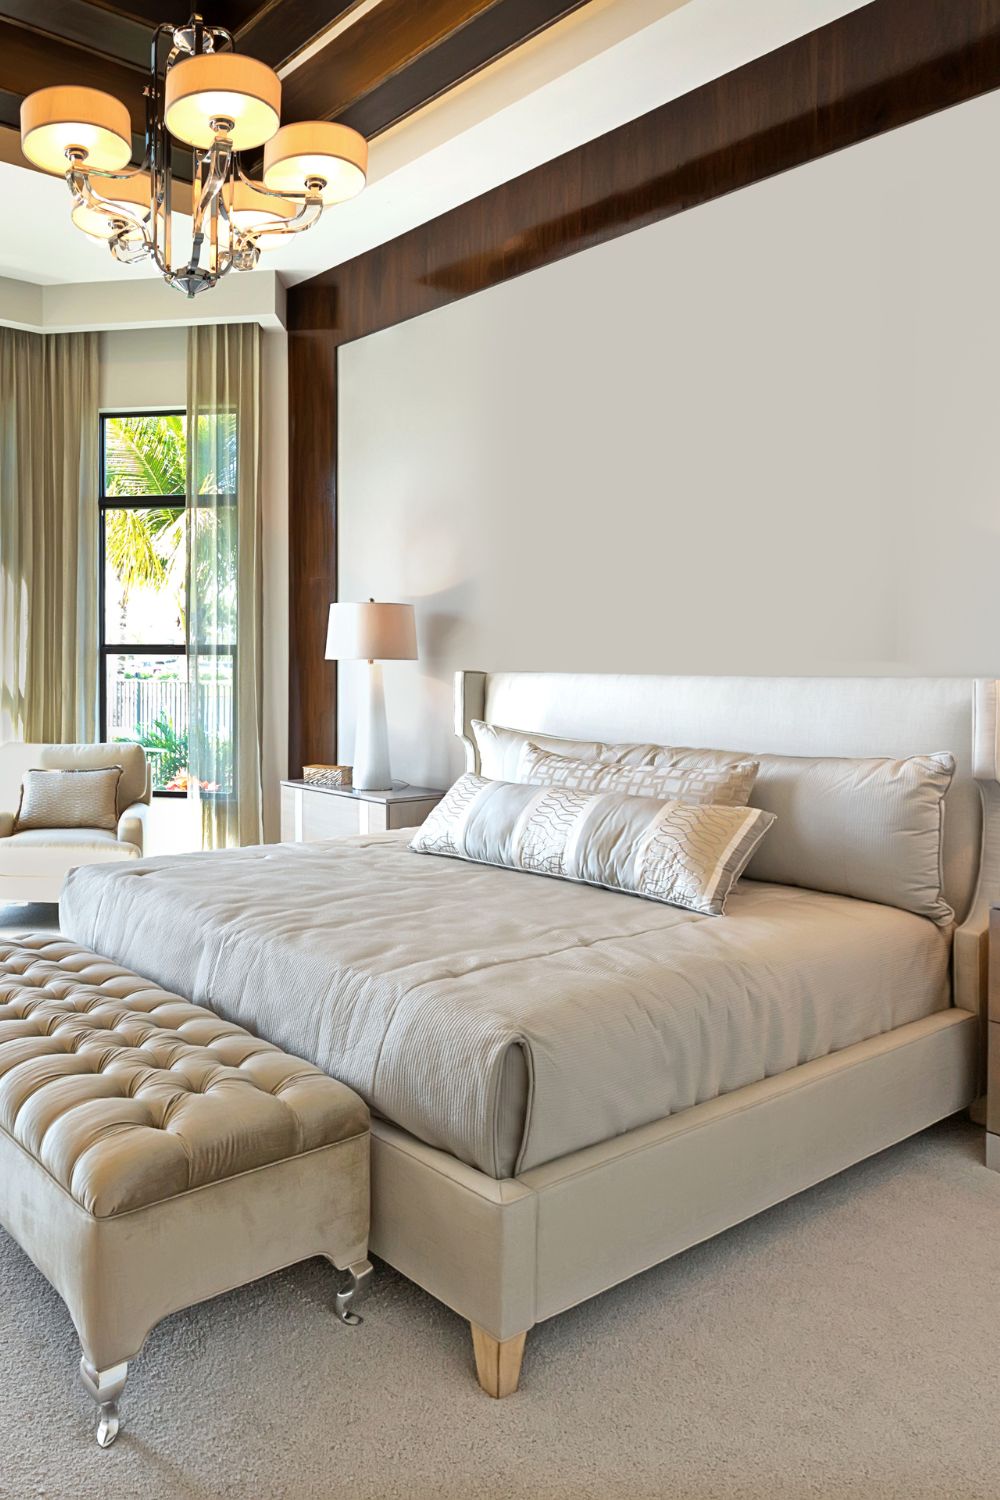 5 Ways to Make Your Bedroom Better